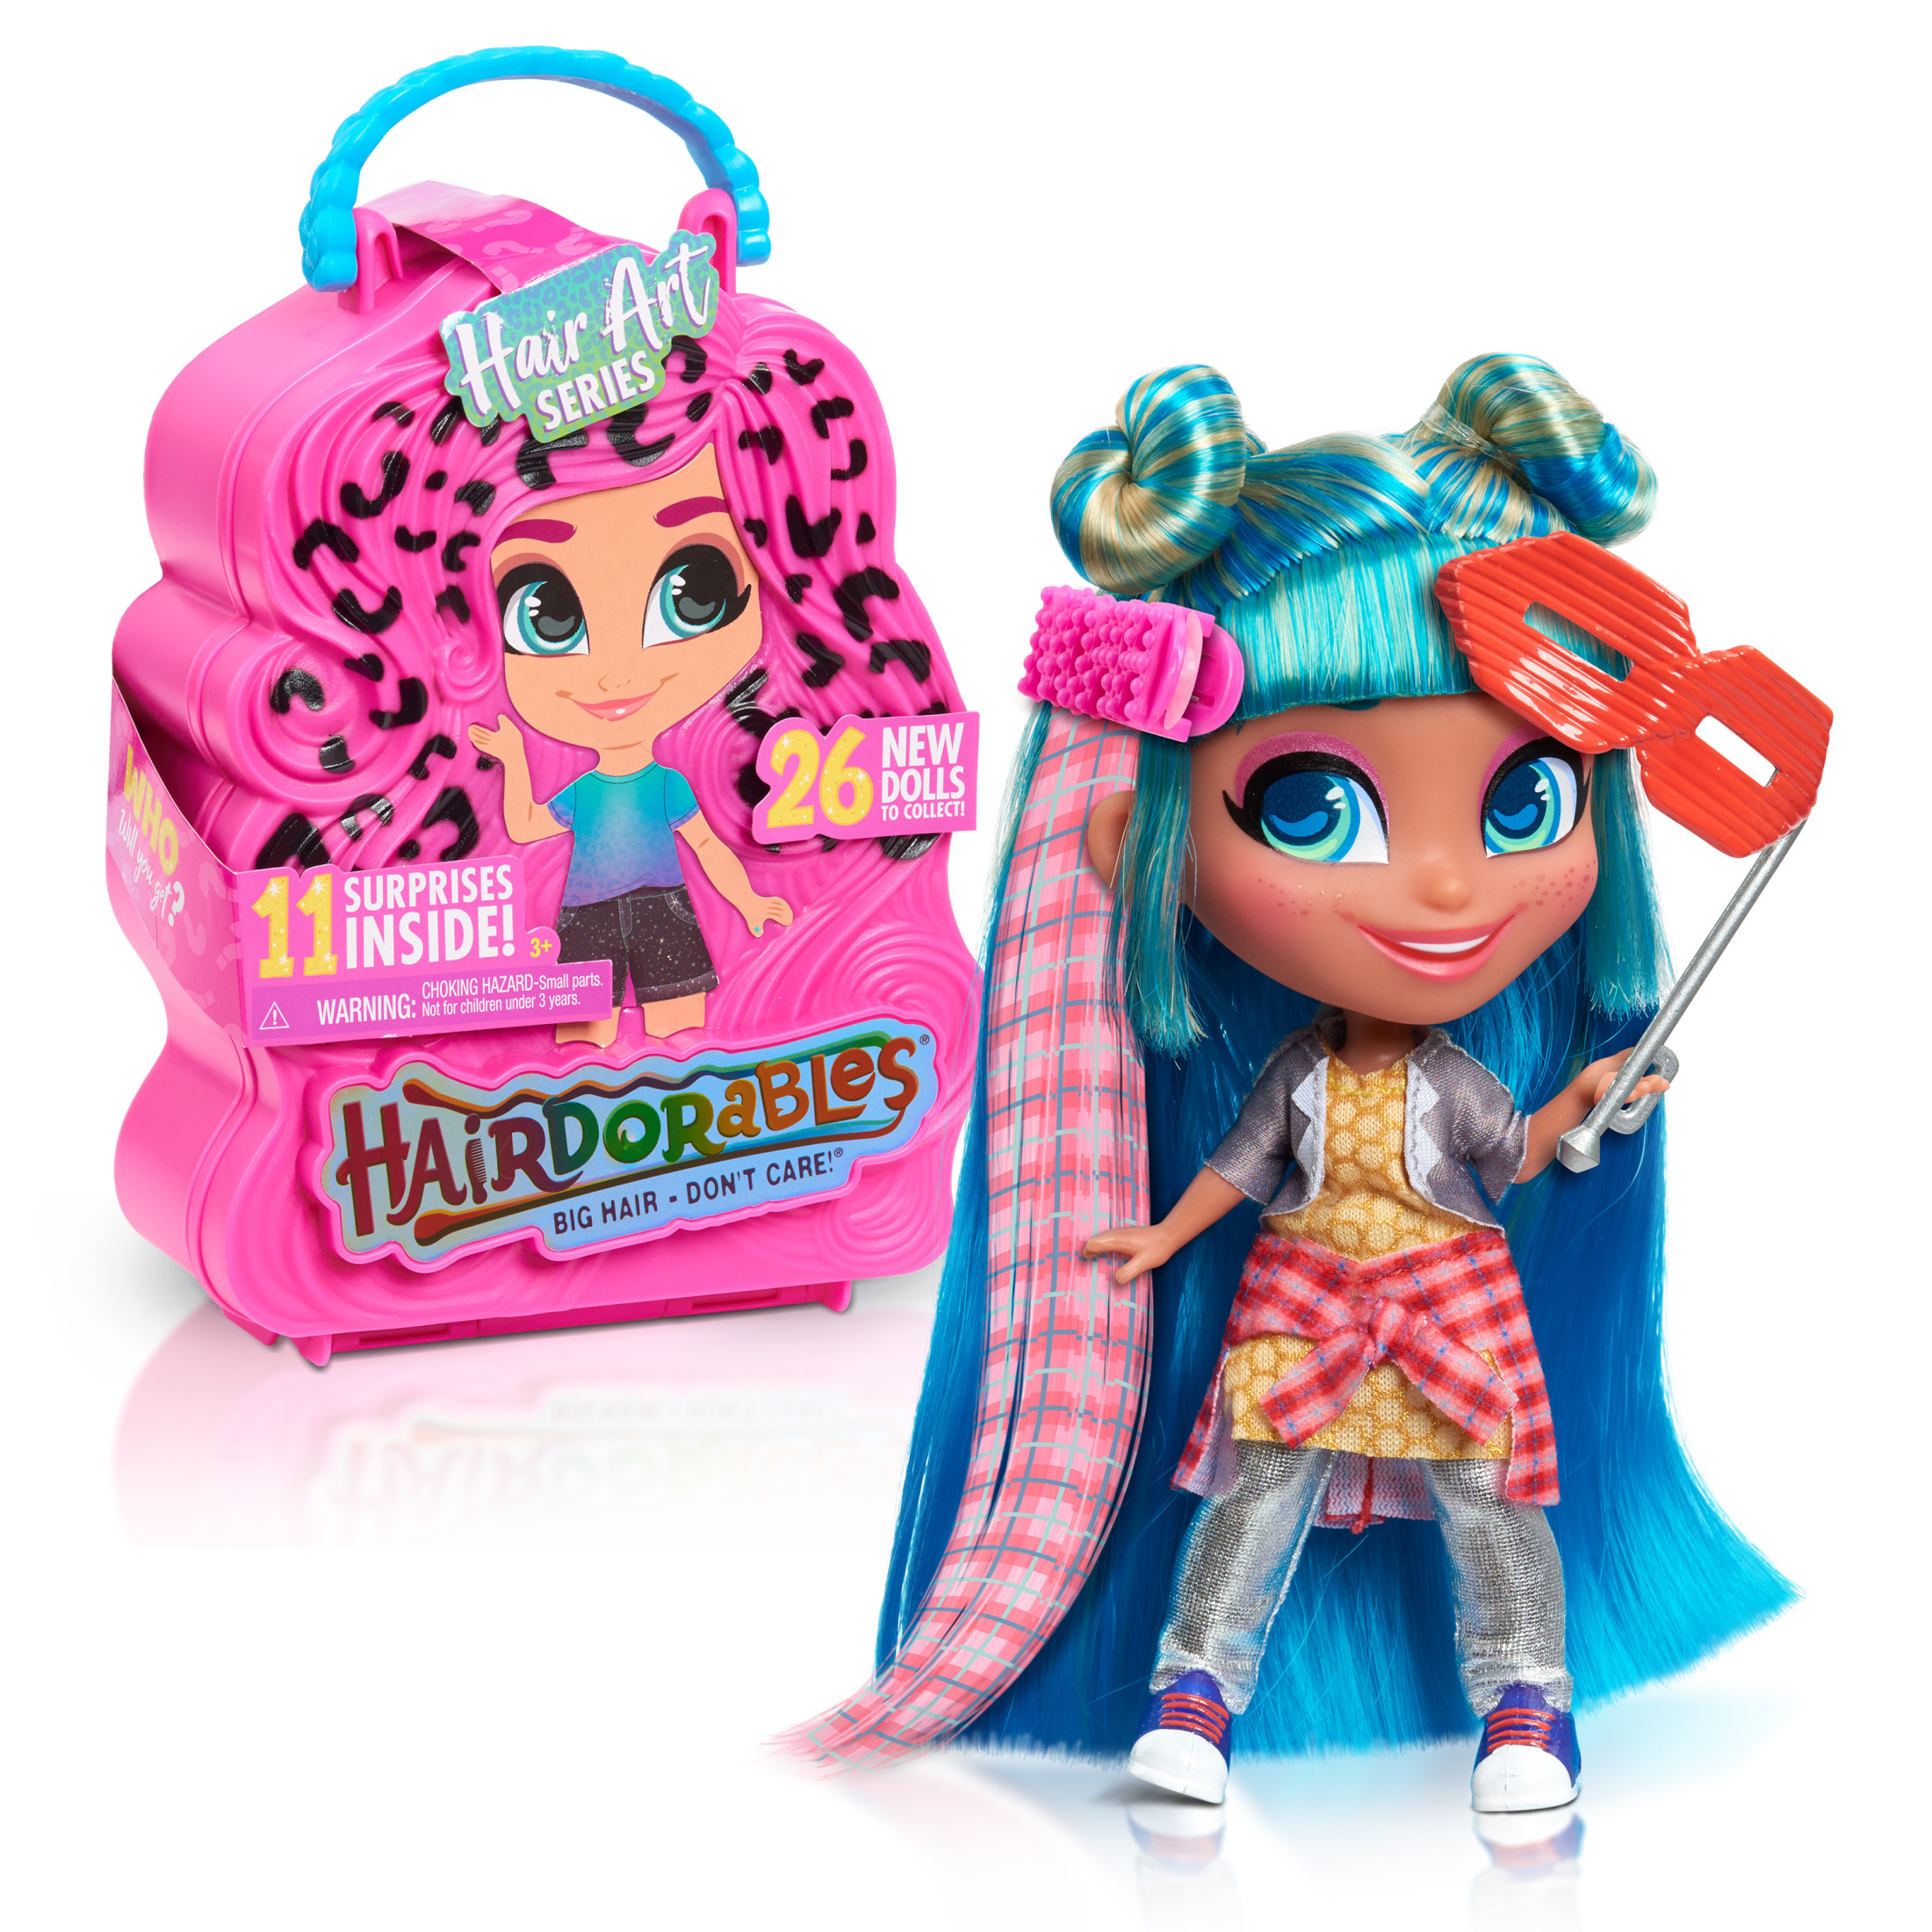 Hairdorables Collectible Doll Hair Art Series 5, styles and case colors may vary, each sold separately, Kids Toys for Ages 3 up - image 1 of 8